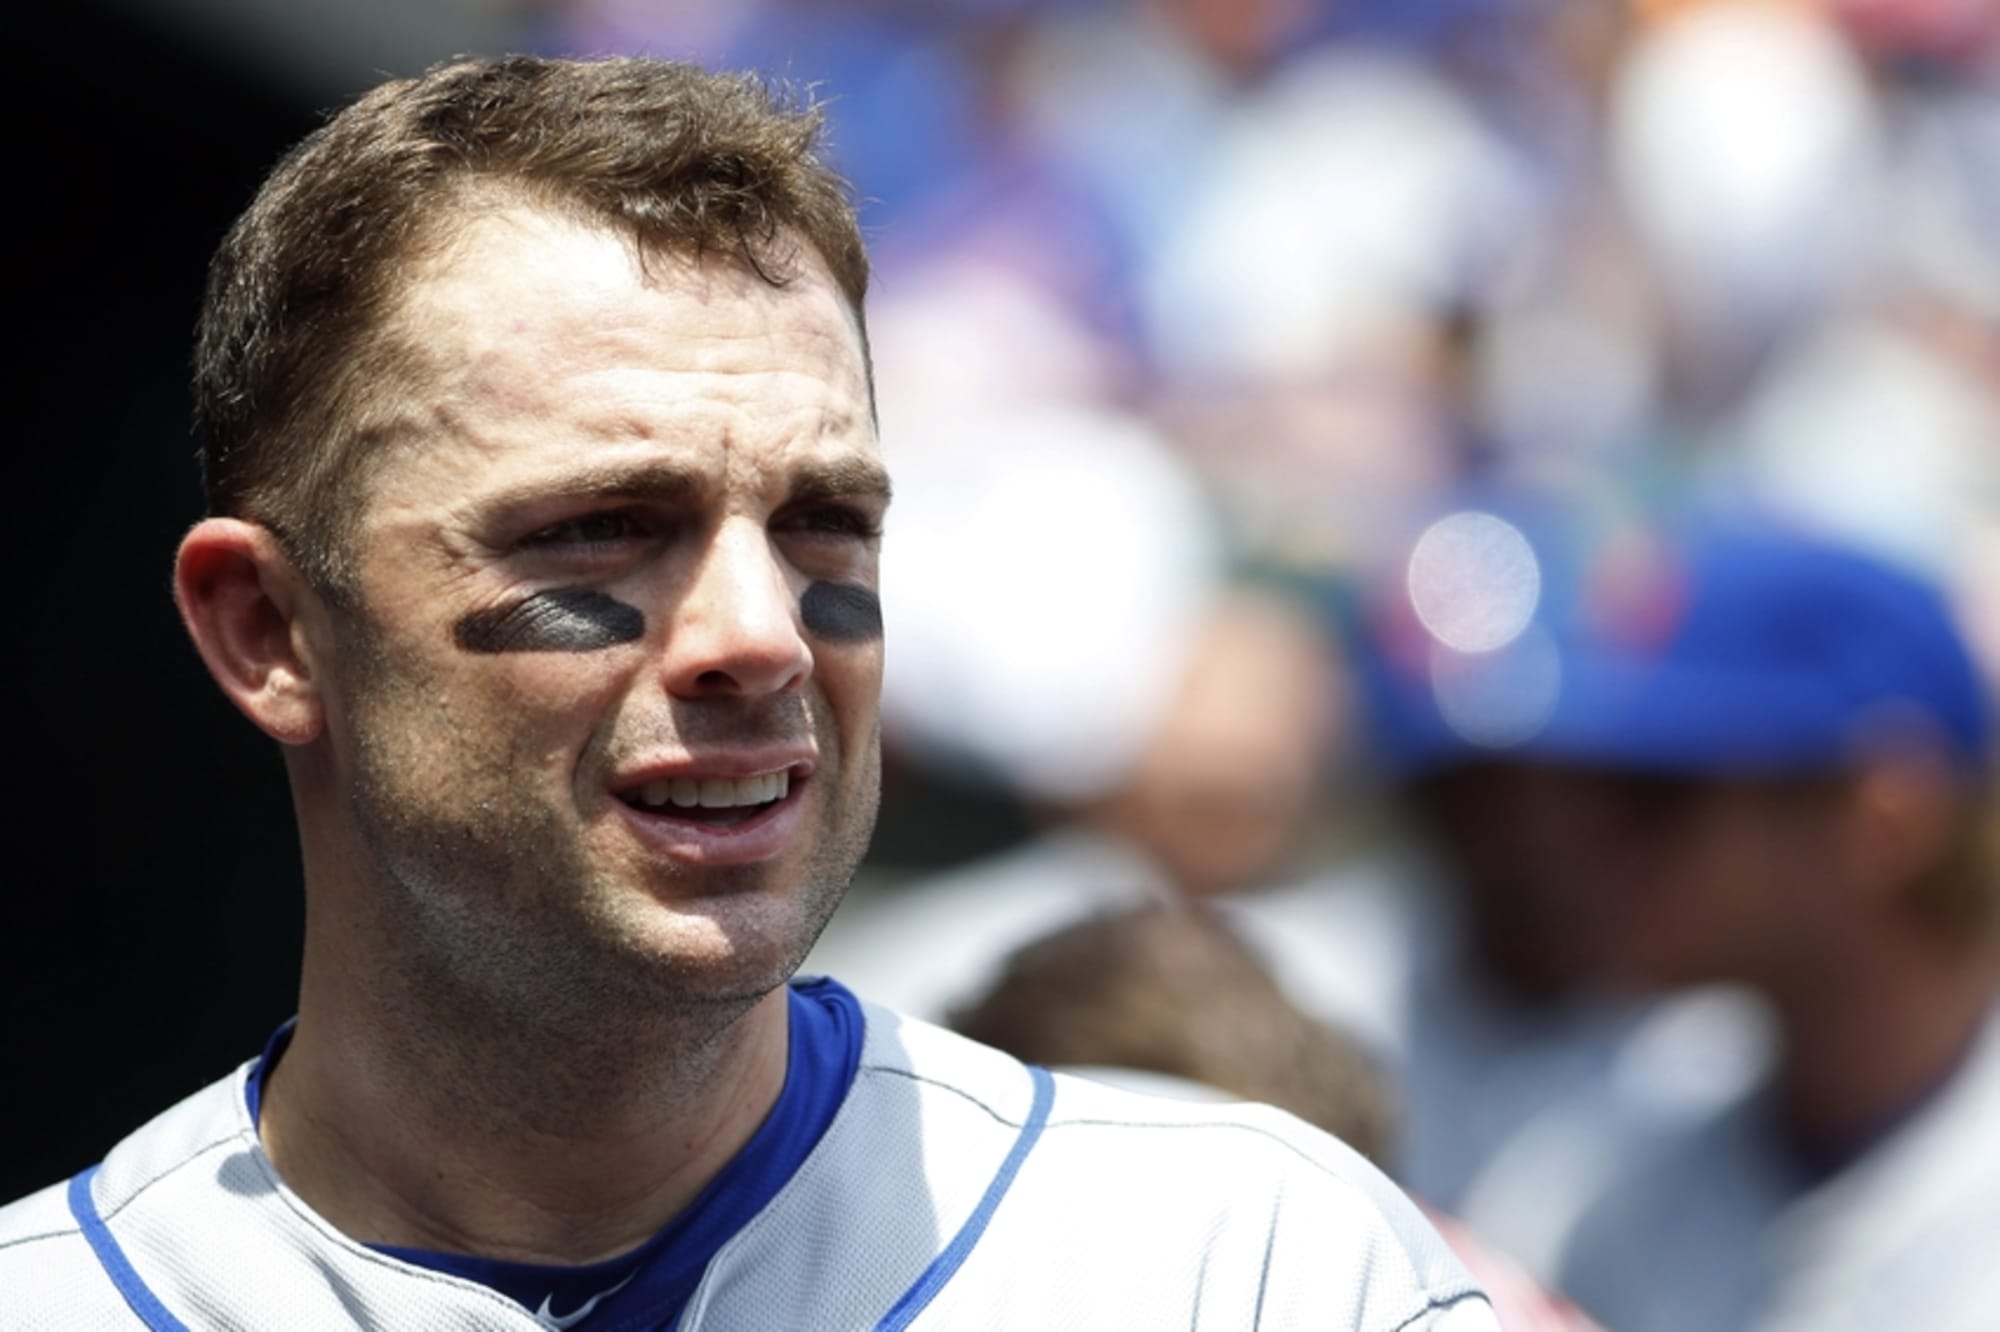 You can play as Mets' David Wright in MLB The Show '23